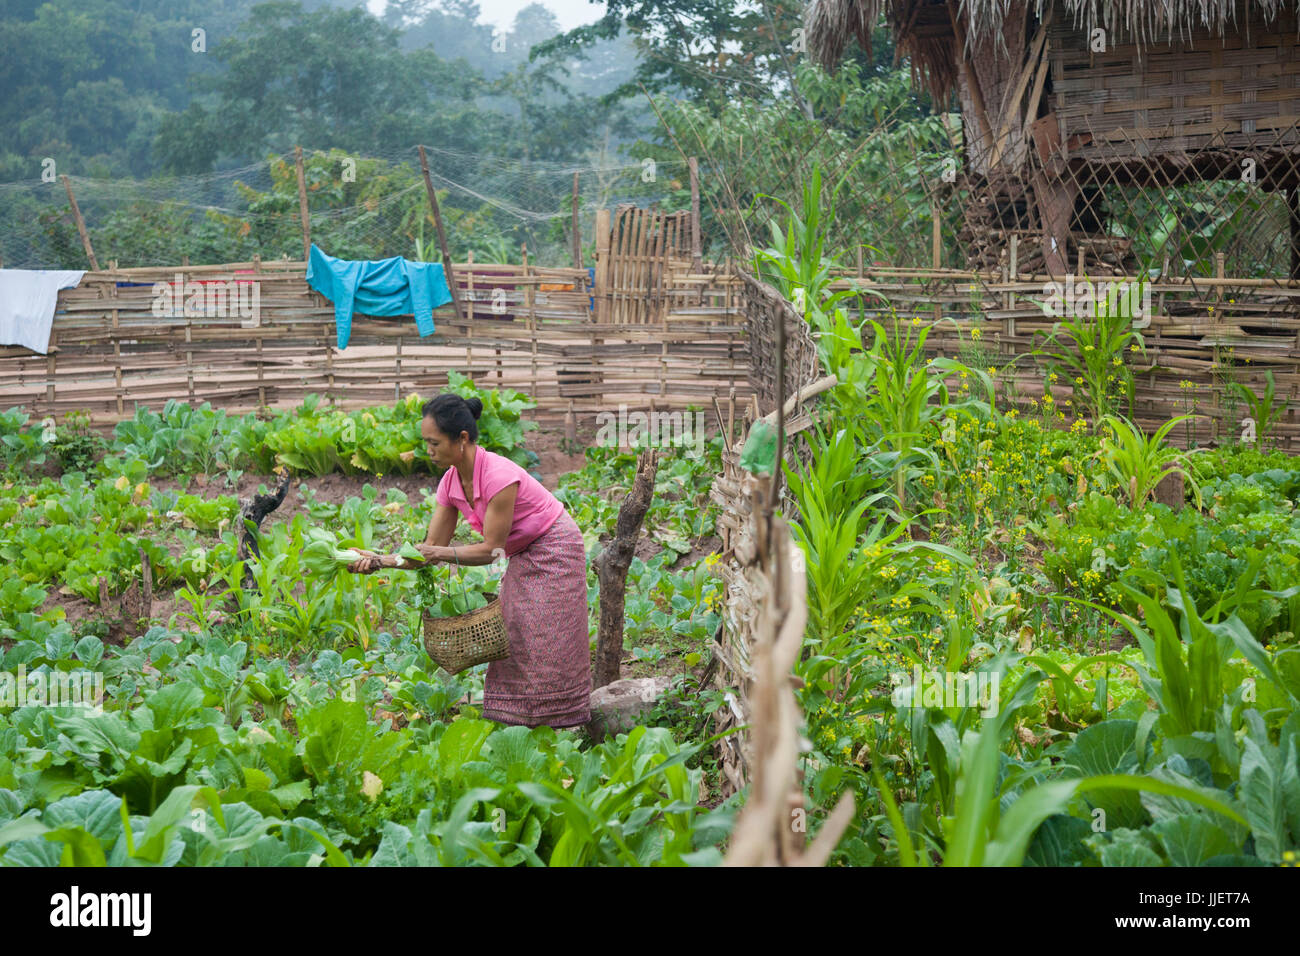 A woman collects Chinese cabbage (Brassica rapa) from her extensive garden in Muang Hat Hin, Laos. Stock Photo